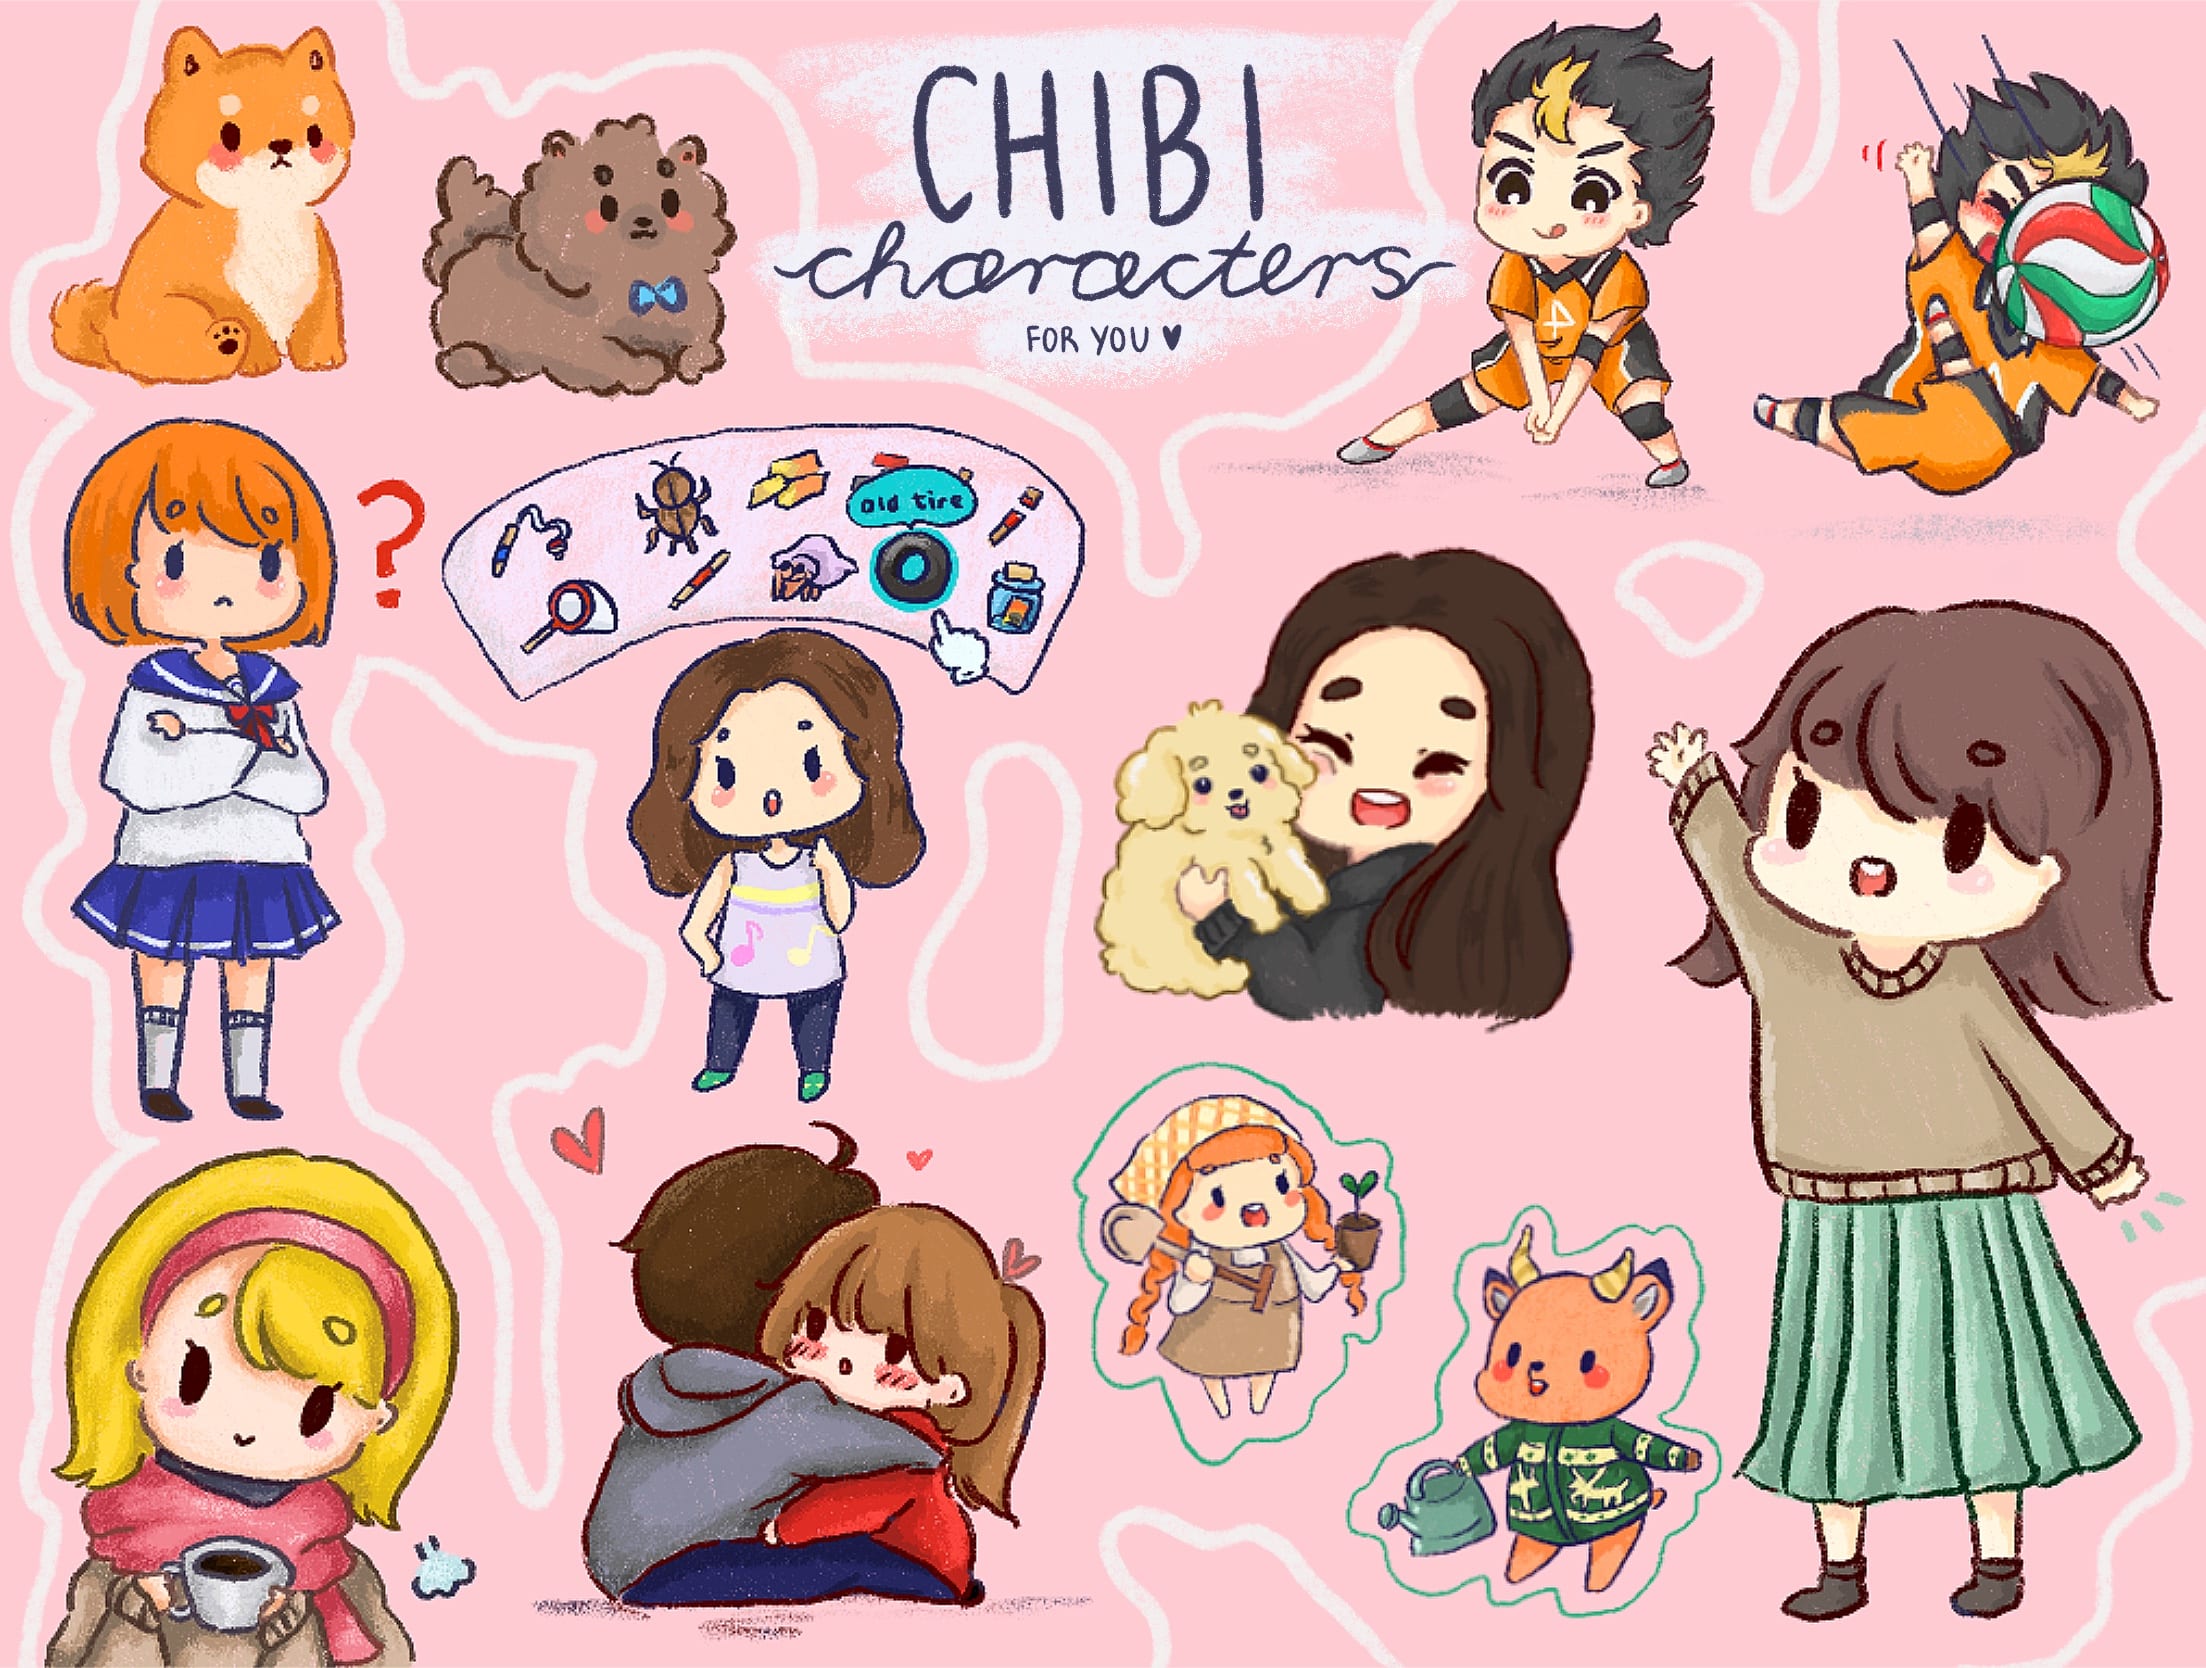 Draw cute chibi anime character art or icon by Akaeii | Fiverr